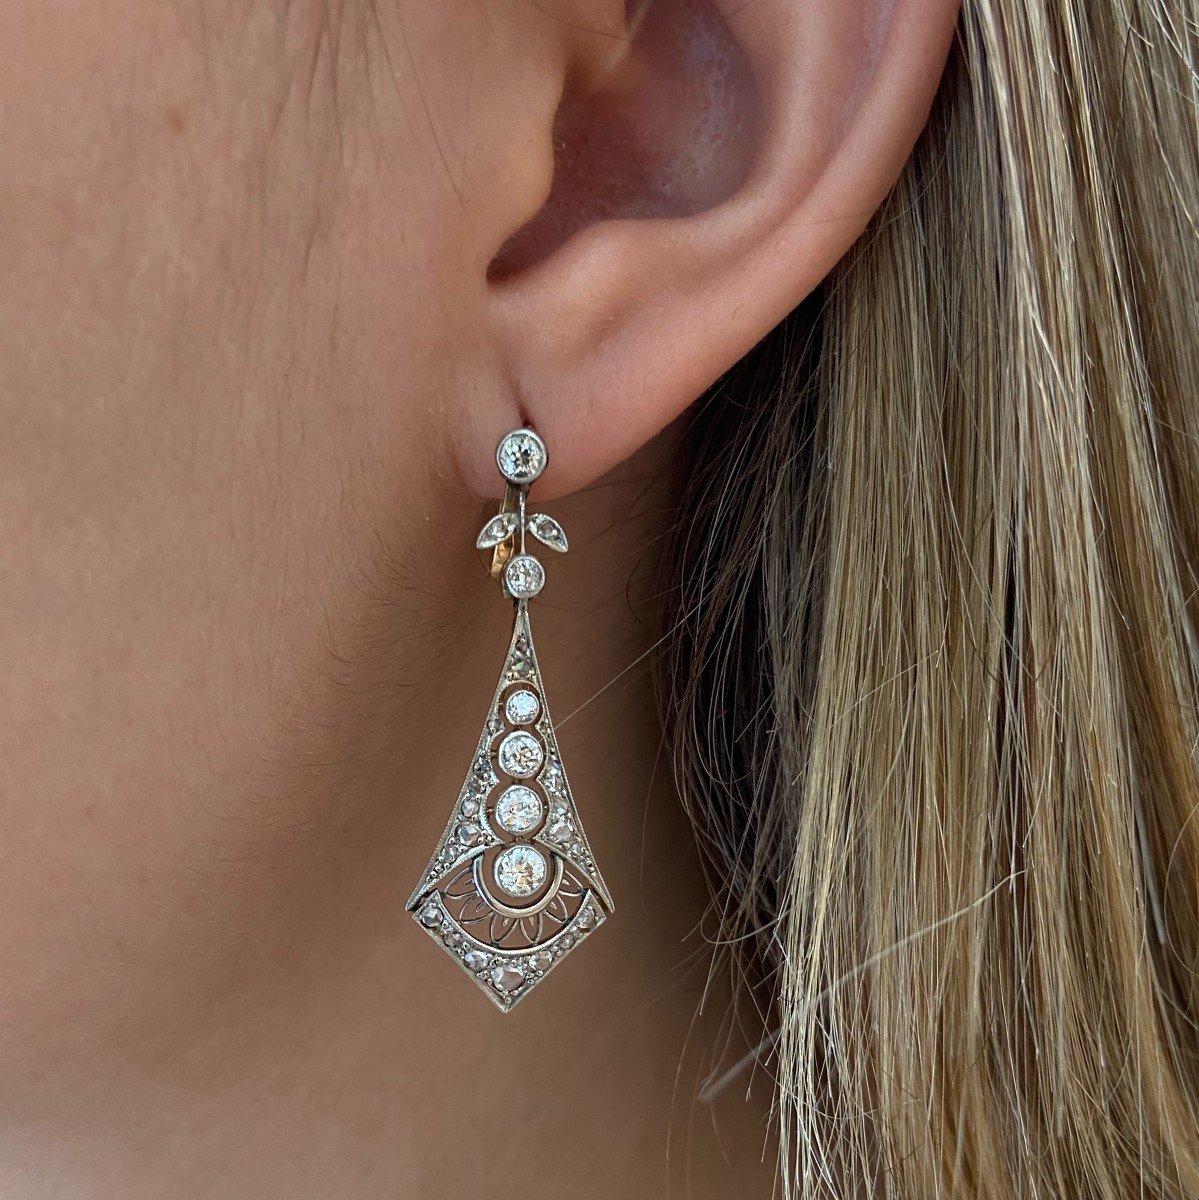 1920s Diamond, Gold And Platinum Earrings.-photo-2